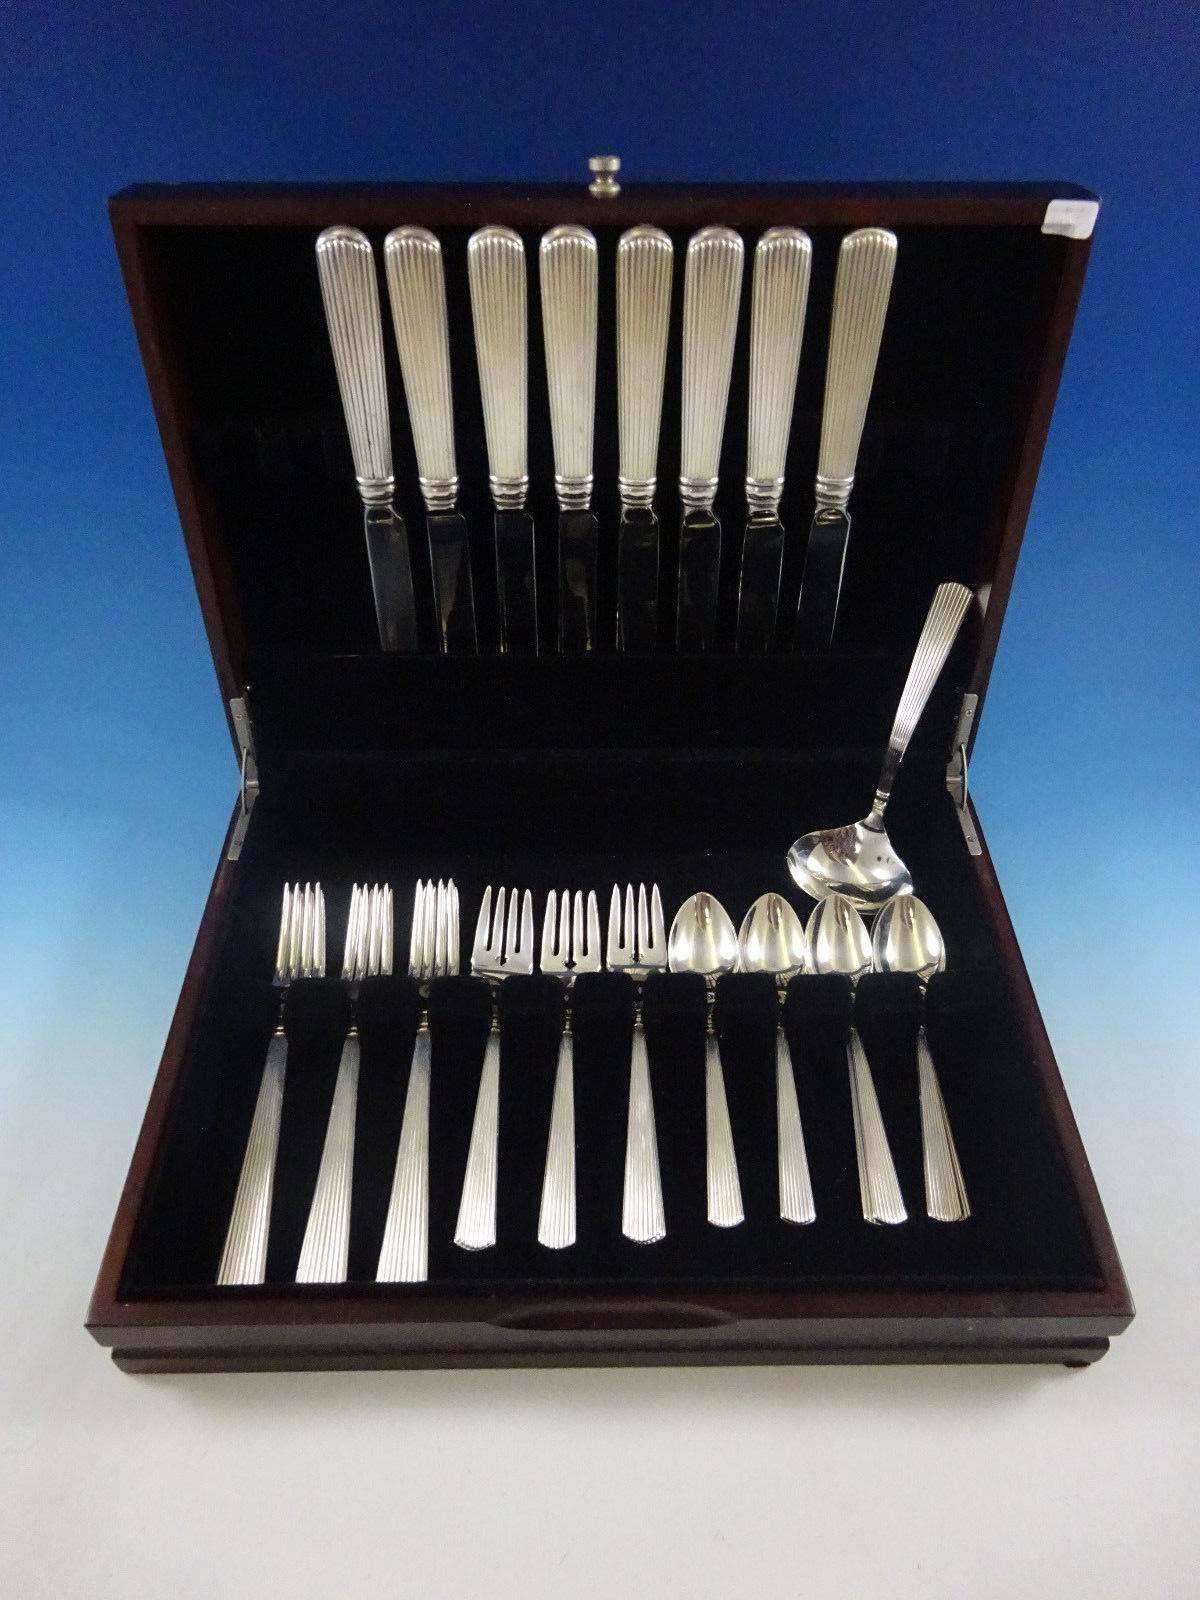 Ashmont by Reed & Barton is a sleek and heavy sterling silver flatware pattern with elegant linear fluting, providing a timeless elegance sure to enhance any tabletop.

Exceptional Ashmont by Reed & Barton sterling silver dinner size flatware set of